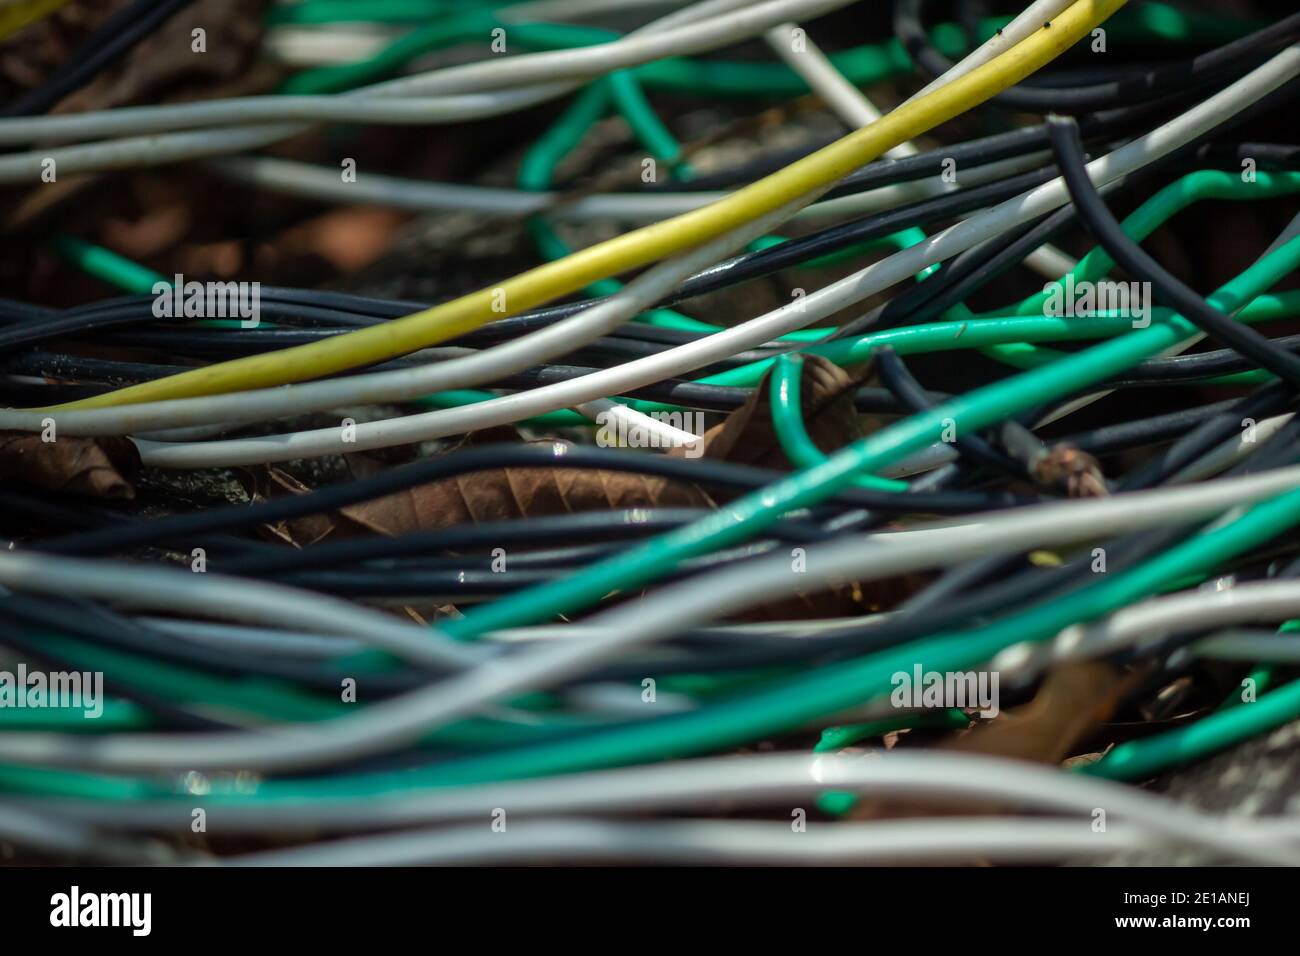 Closeup of several electrical wires forming curved lines with a lot of chaos like if they were abandoned Stock Photo